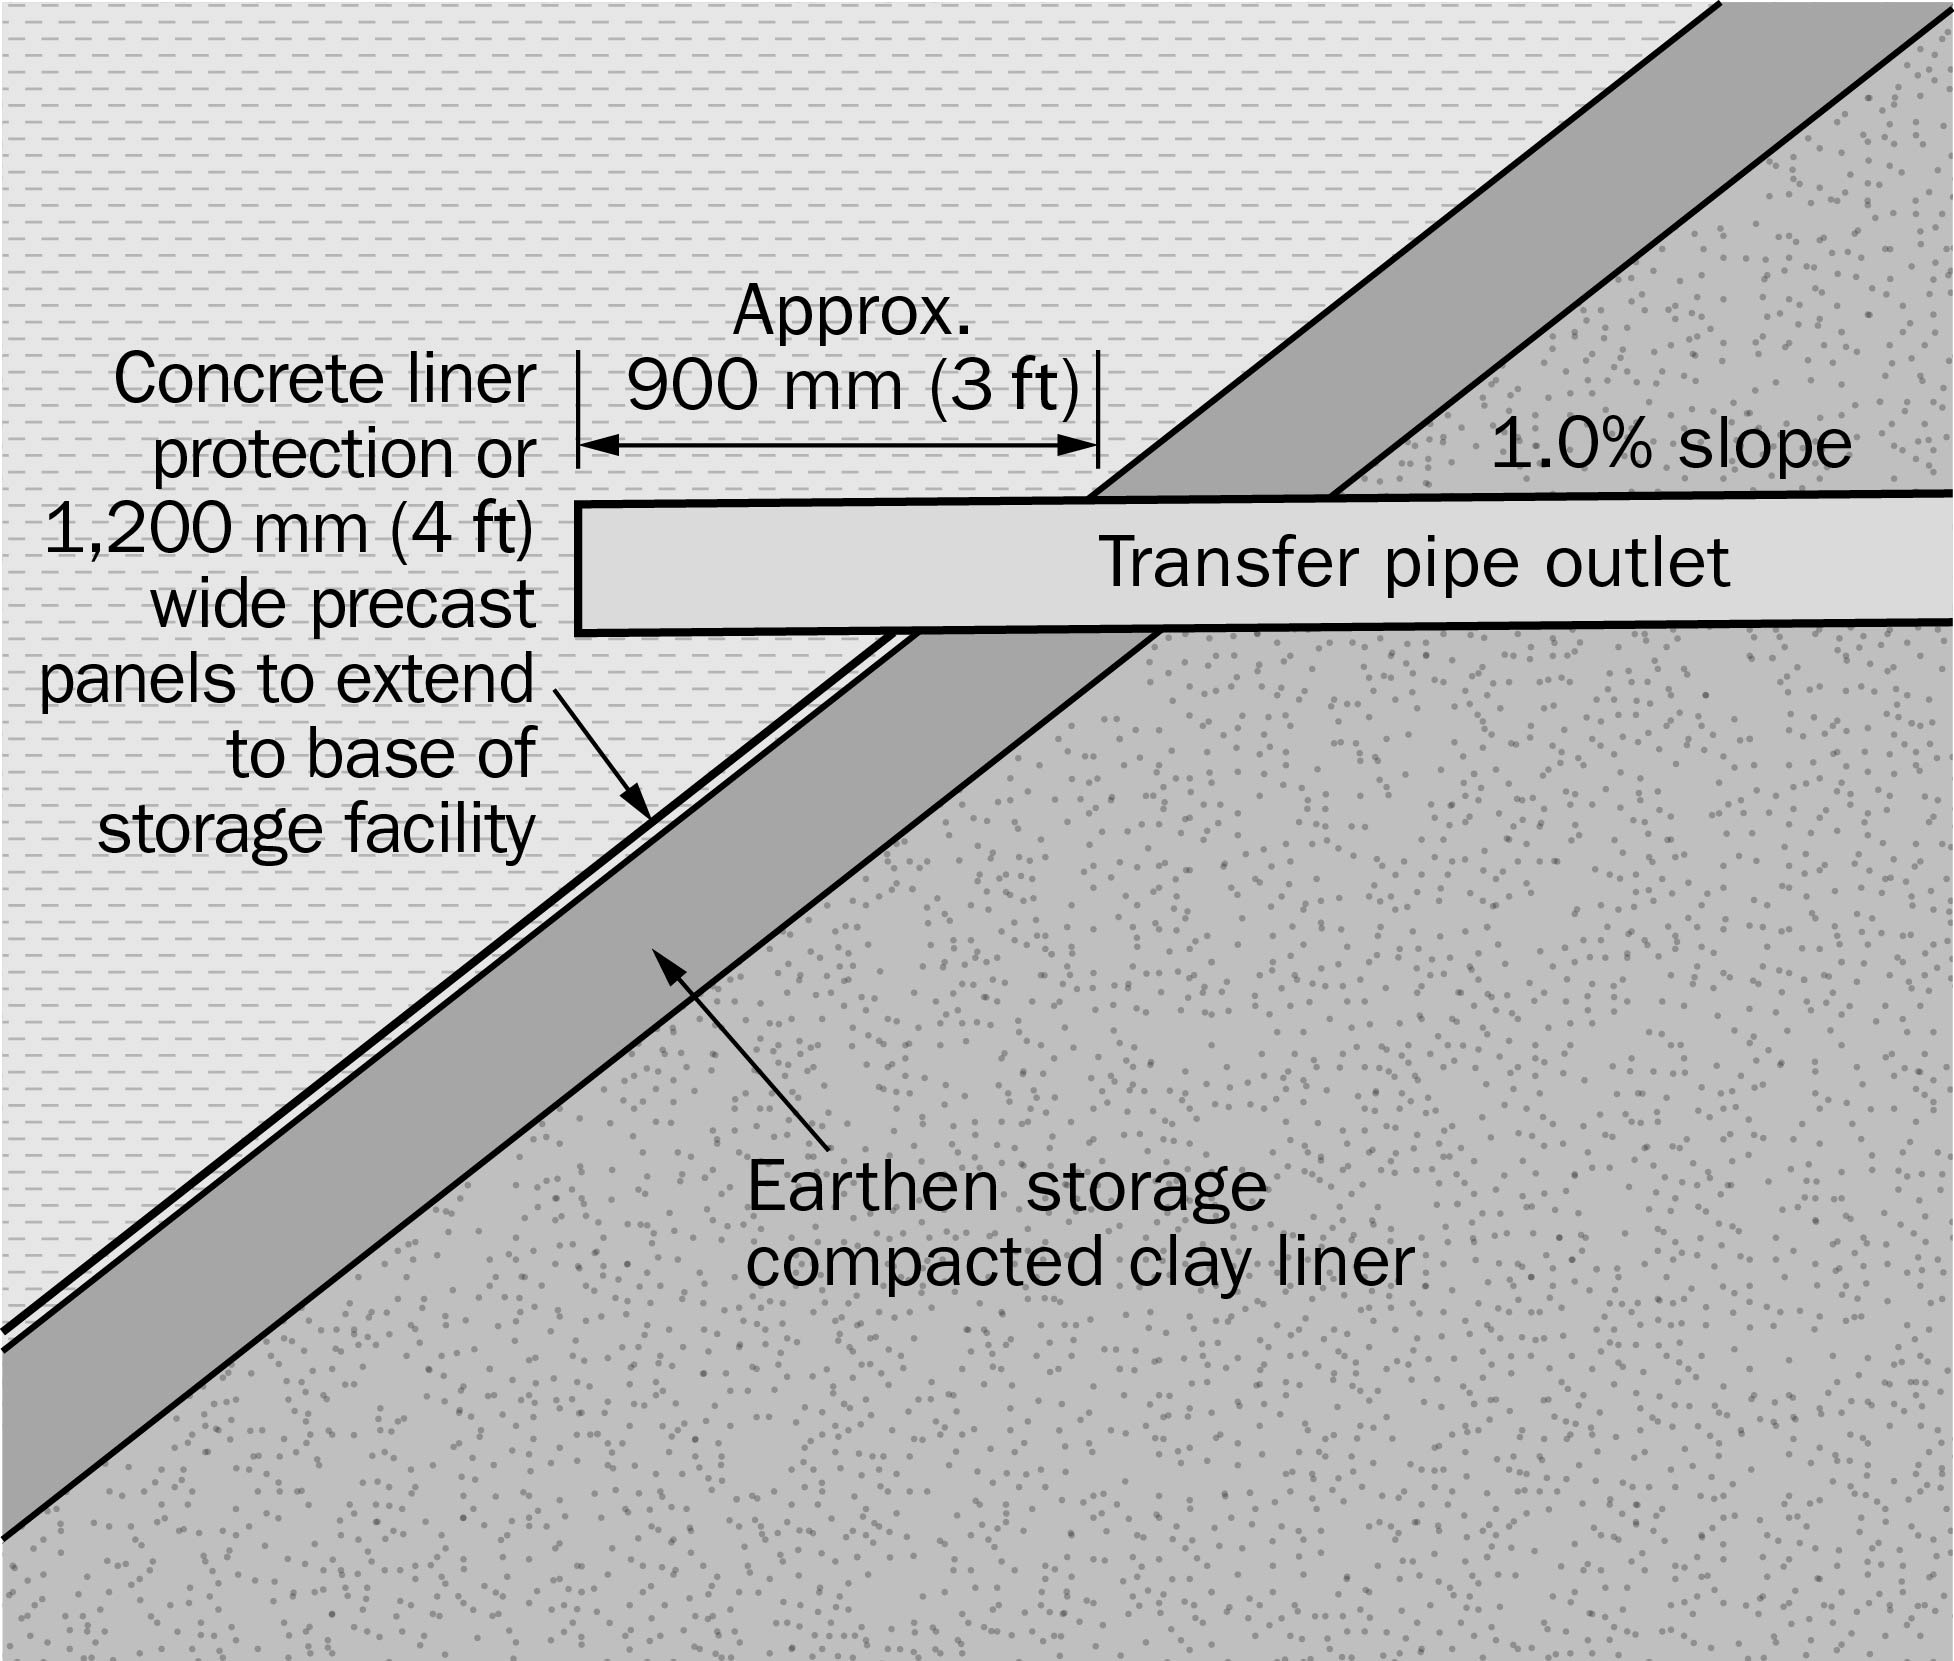 A drawing showing a cross-section of an earthen manure storage with a compacted clay liner.